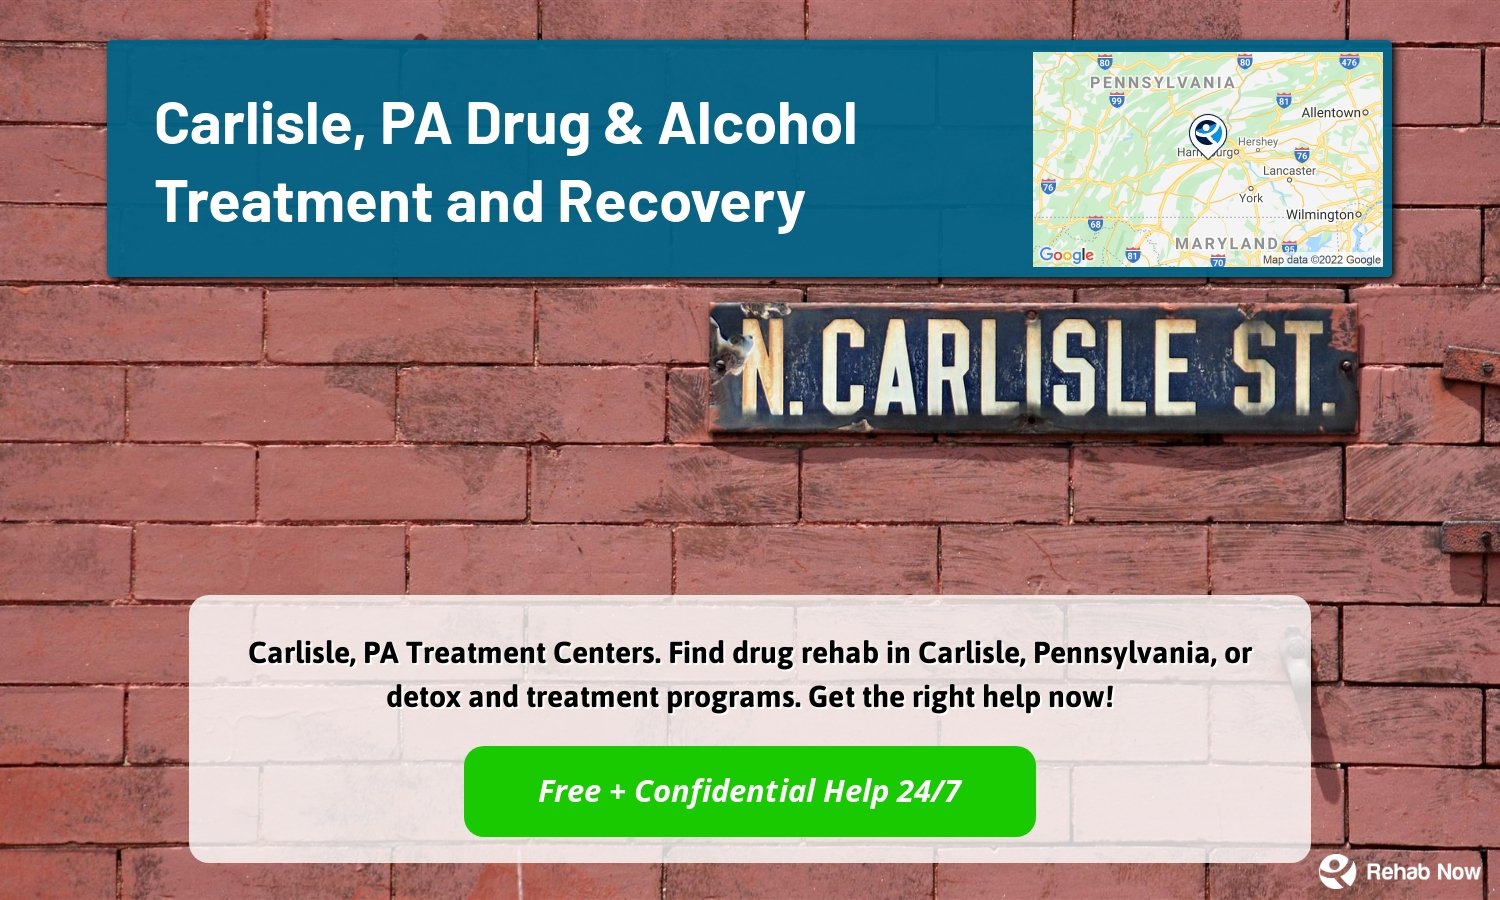 Carlisle, PA Treatment Centers. Find drug rehab in Carlisle, Pennsylvania, or detox and treatment programs. Get the right help now!